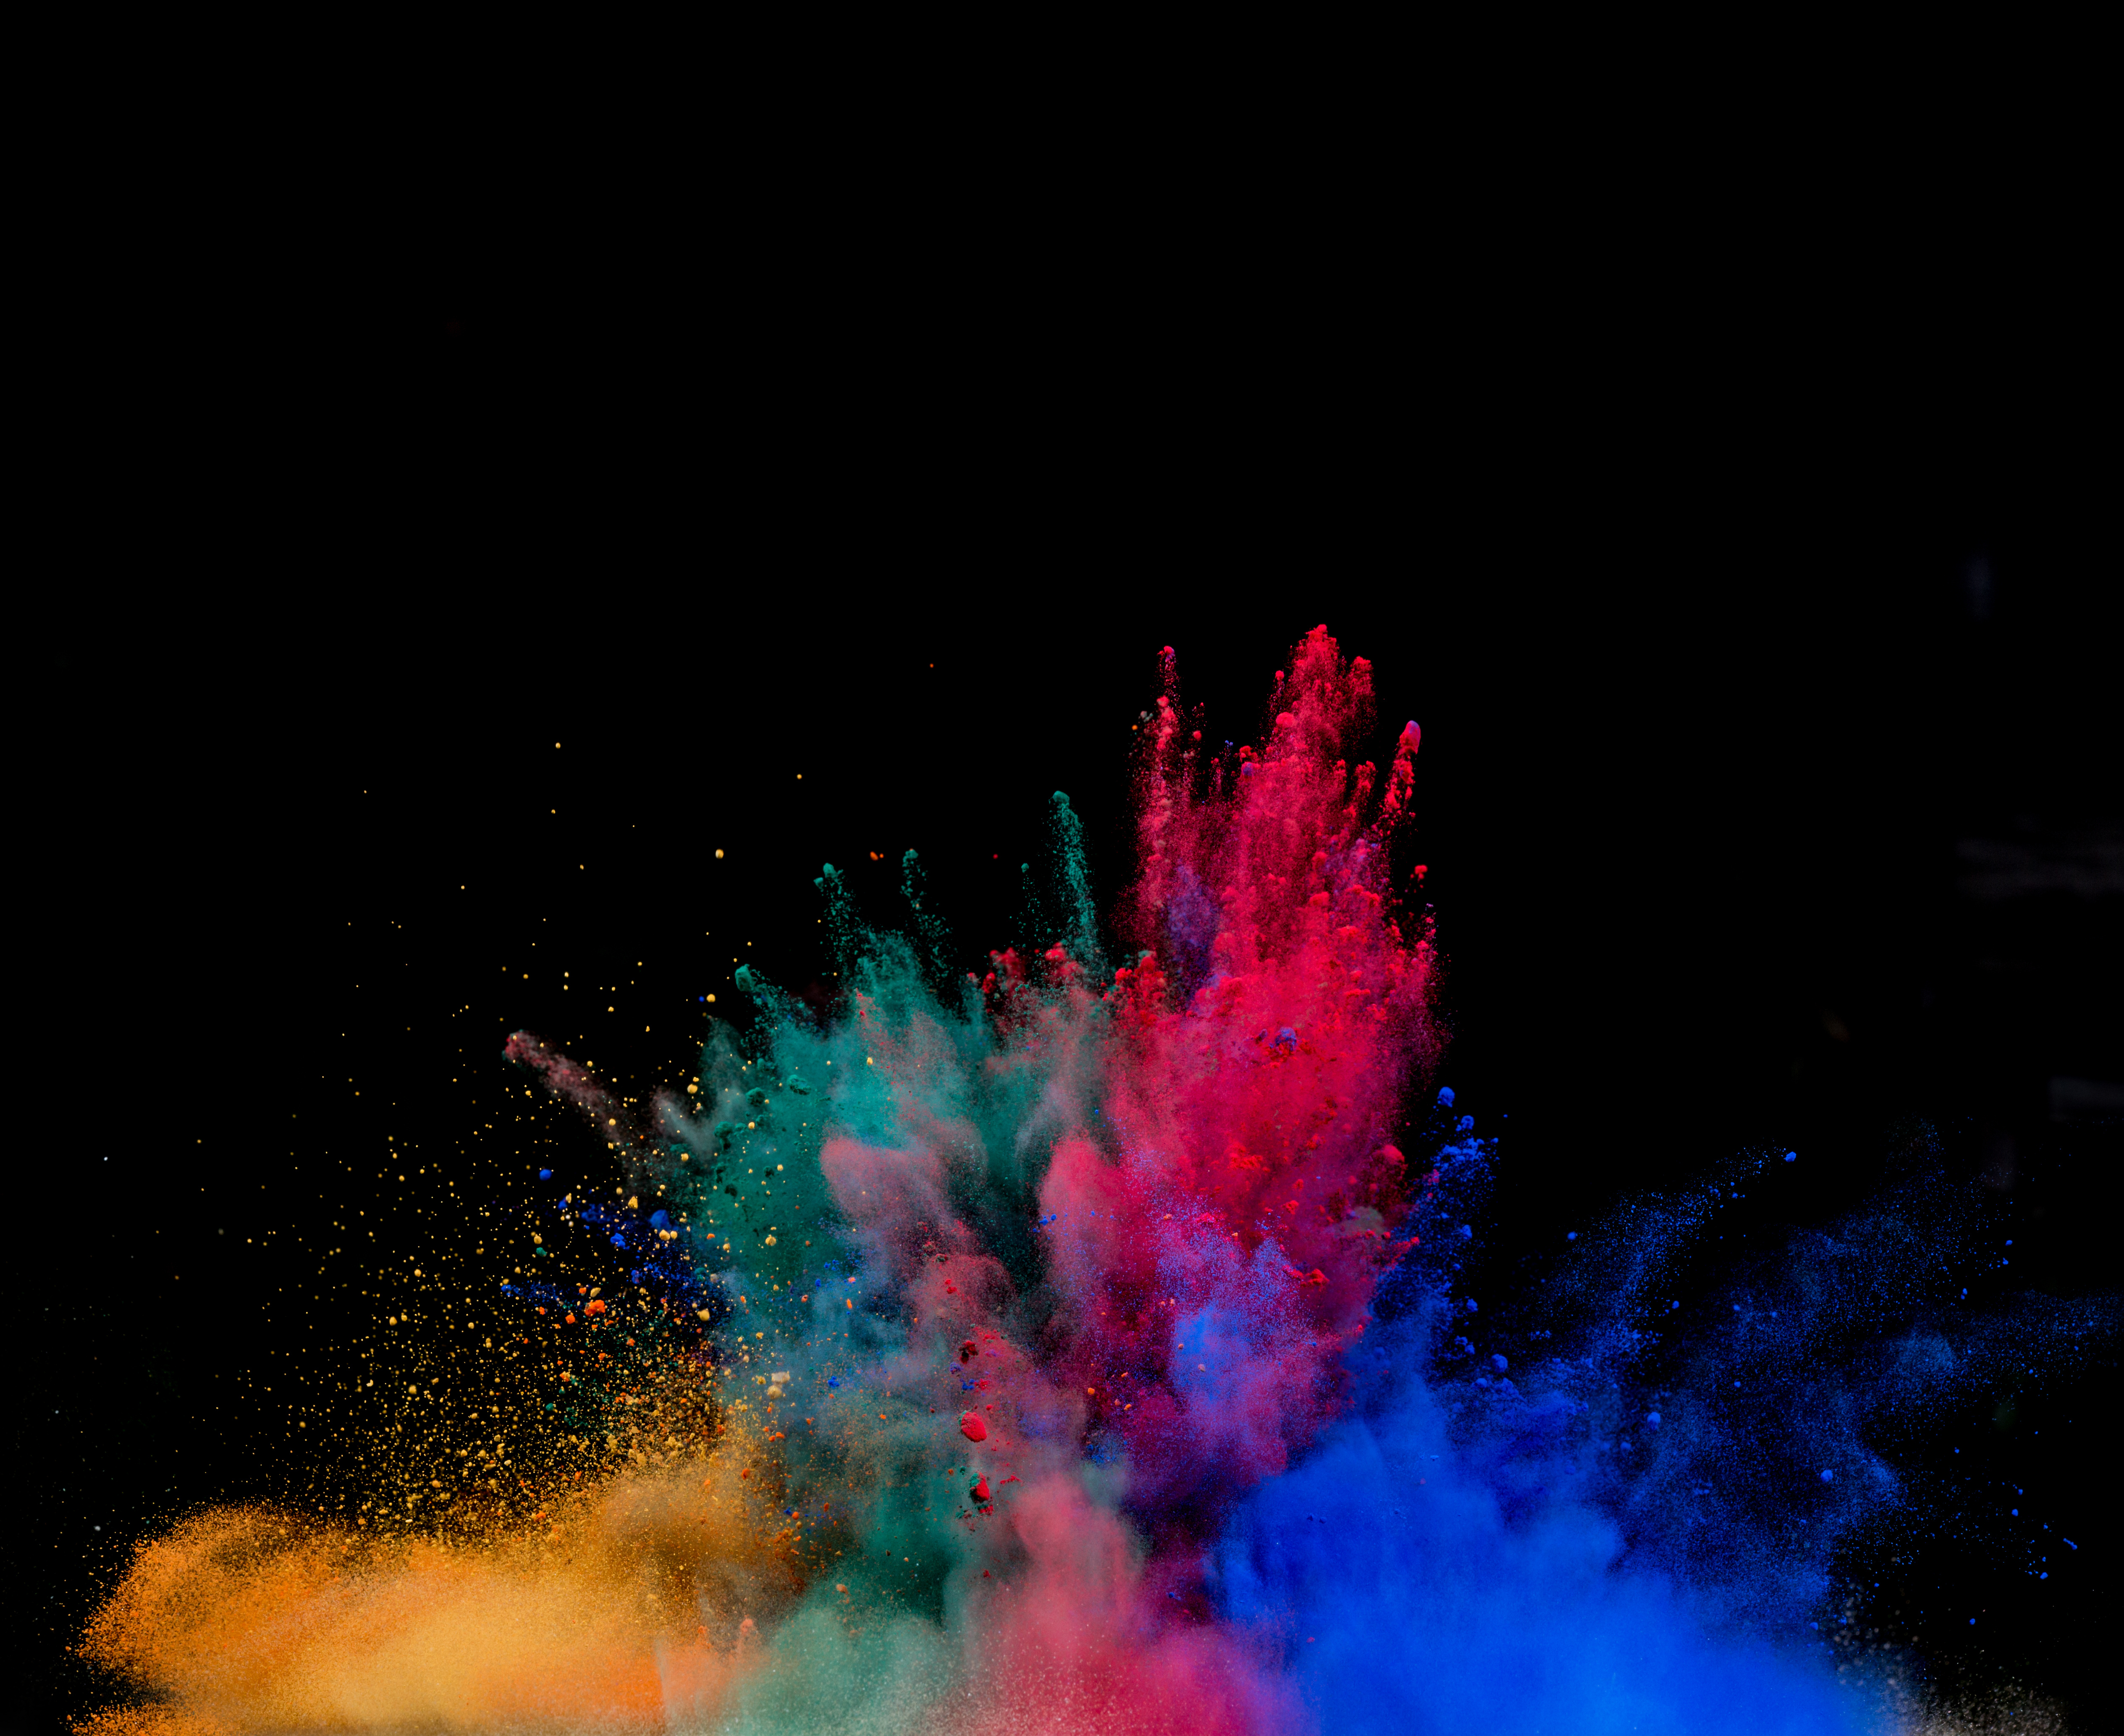 Colored Dust Explosion On Black Background Wallpaper